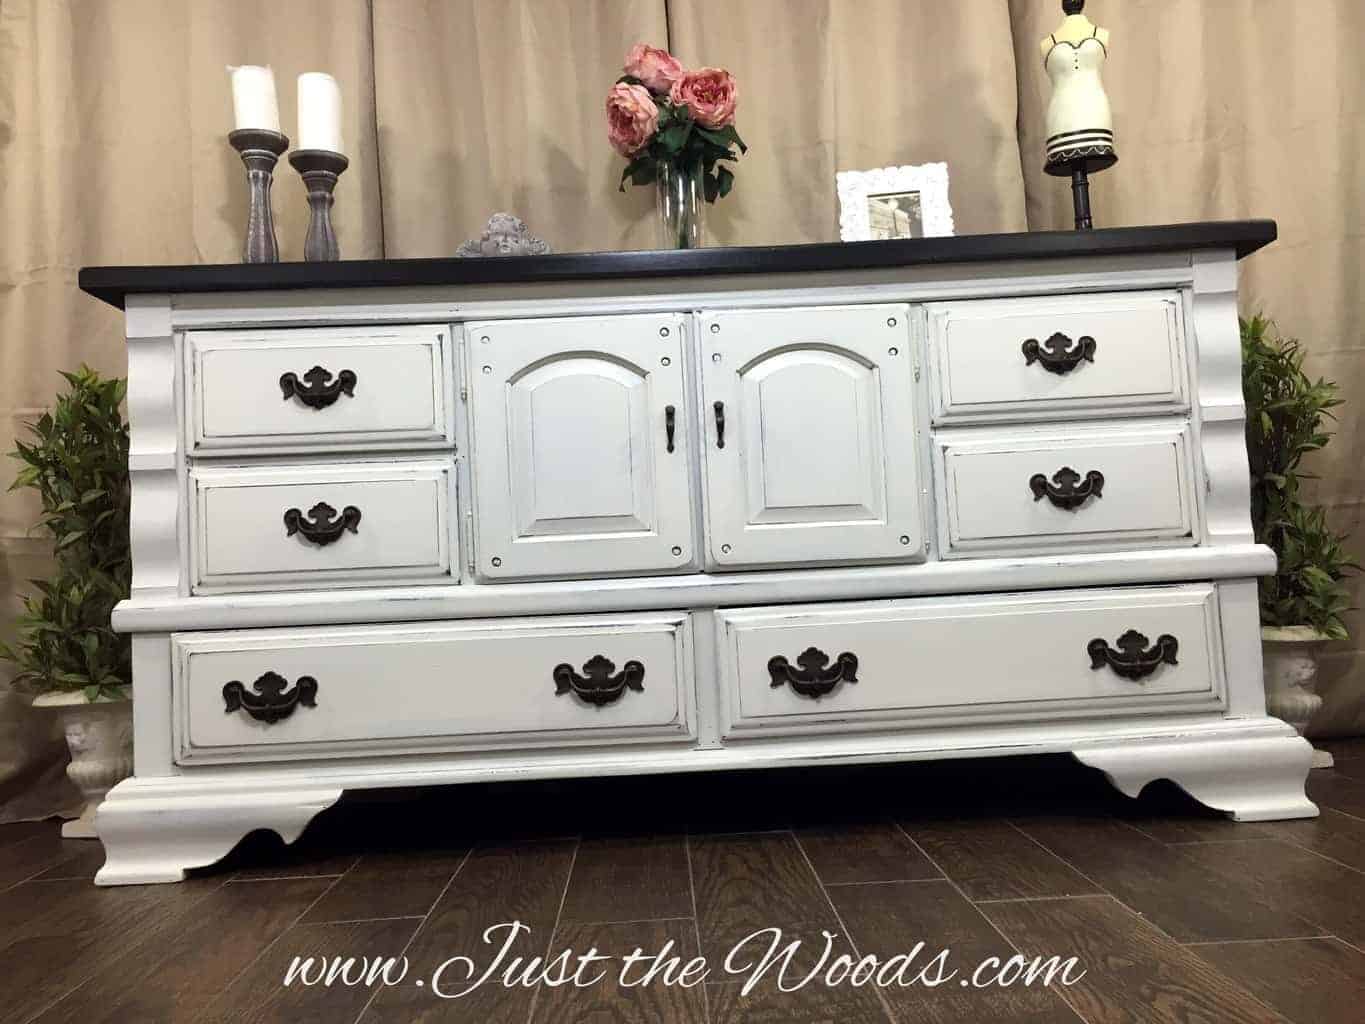 How To Paint A Distressed White Dresser, How To Distress A White Dresser